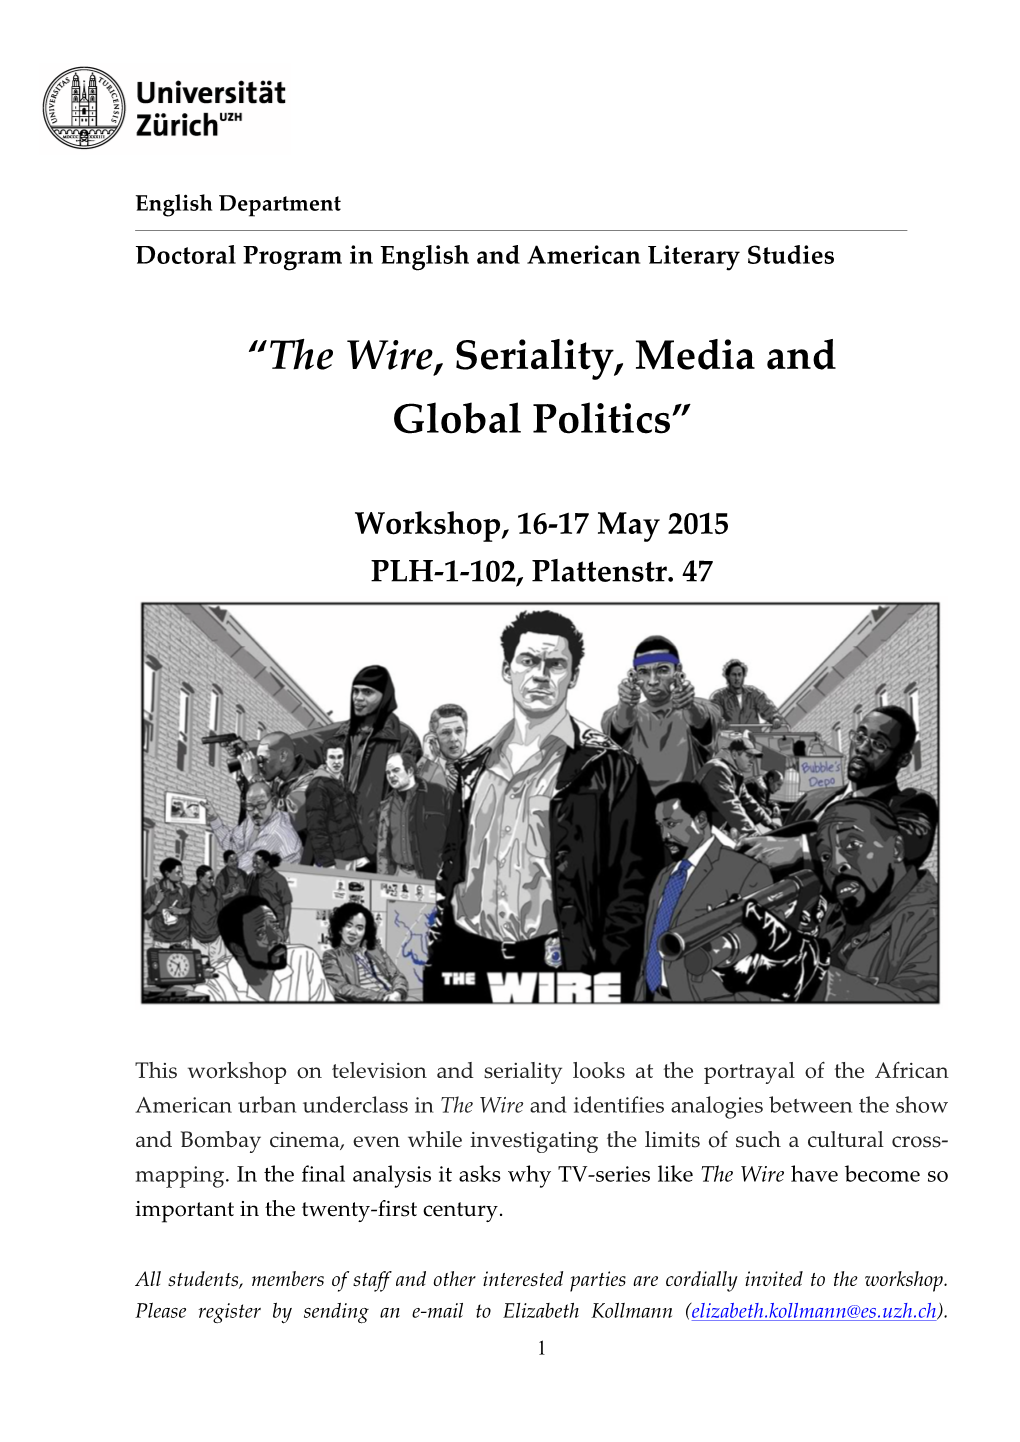 “The Wire, Seriality, Media and Global Politics”